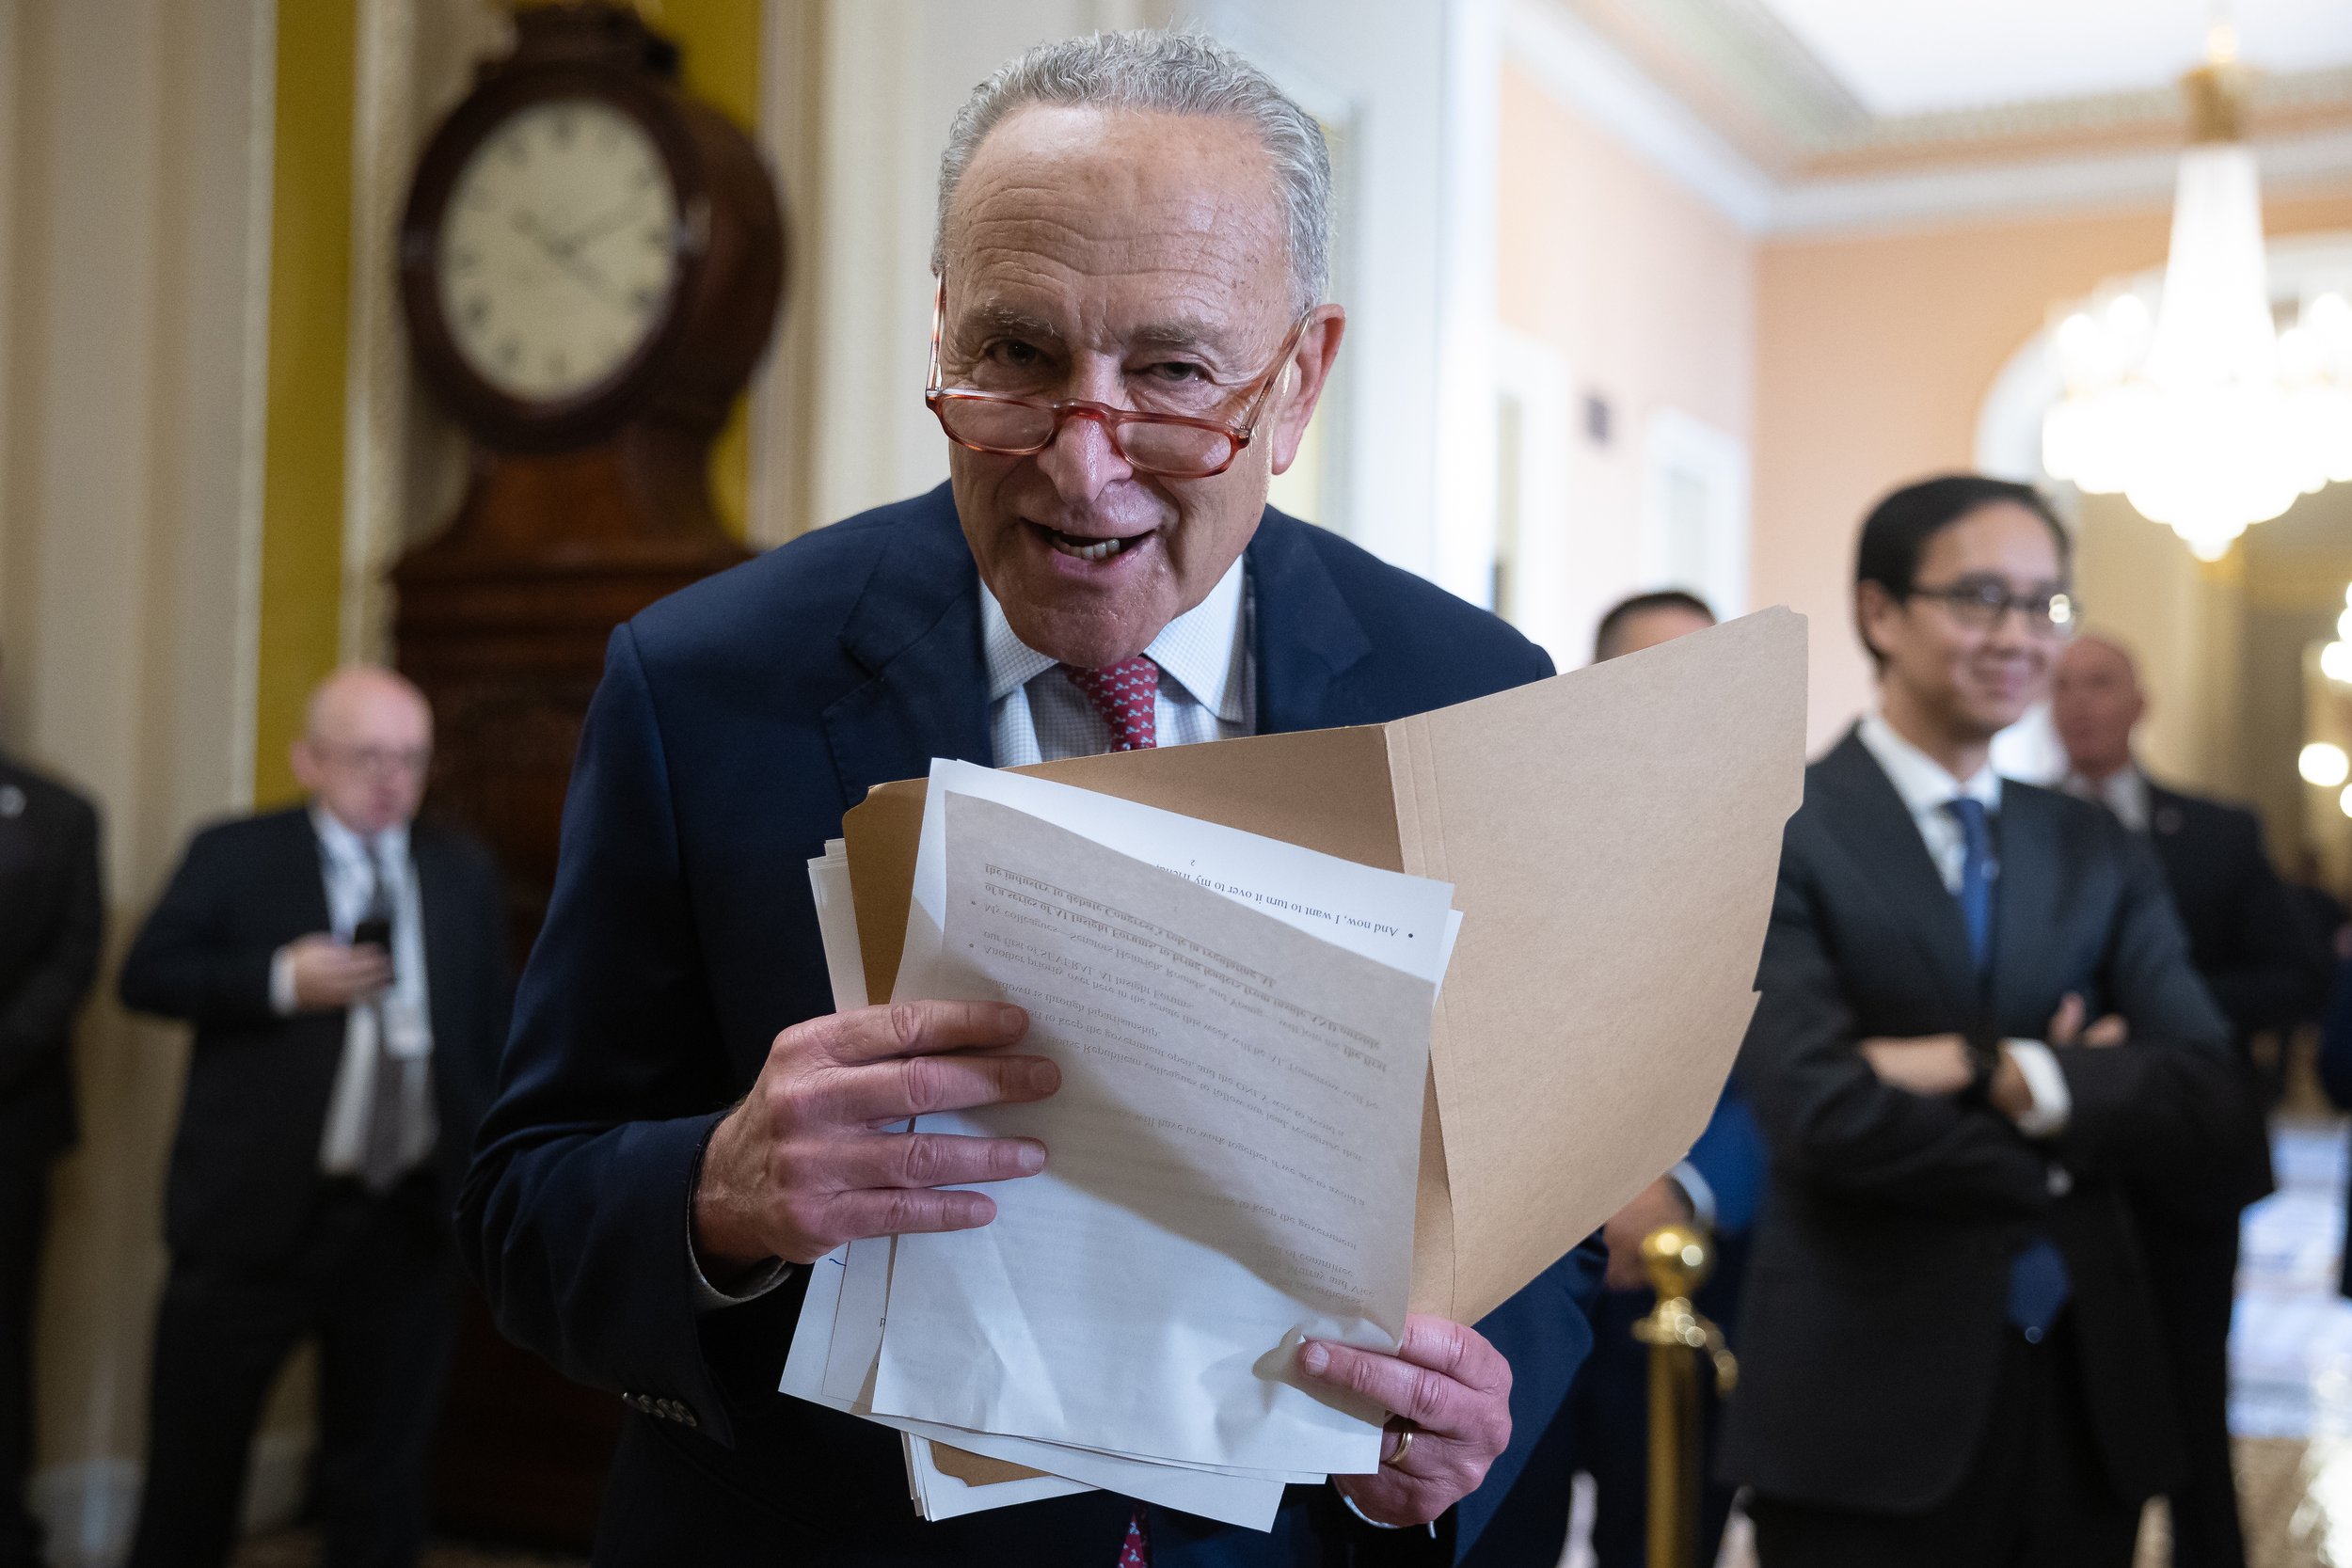  Senate Majority Leader Chuck Schumer (D-N.Y.) demonstratively hides his notes from me during a press conference at the U.S. Capitol Sept. 12, 2023.  